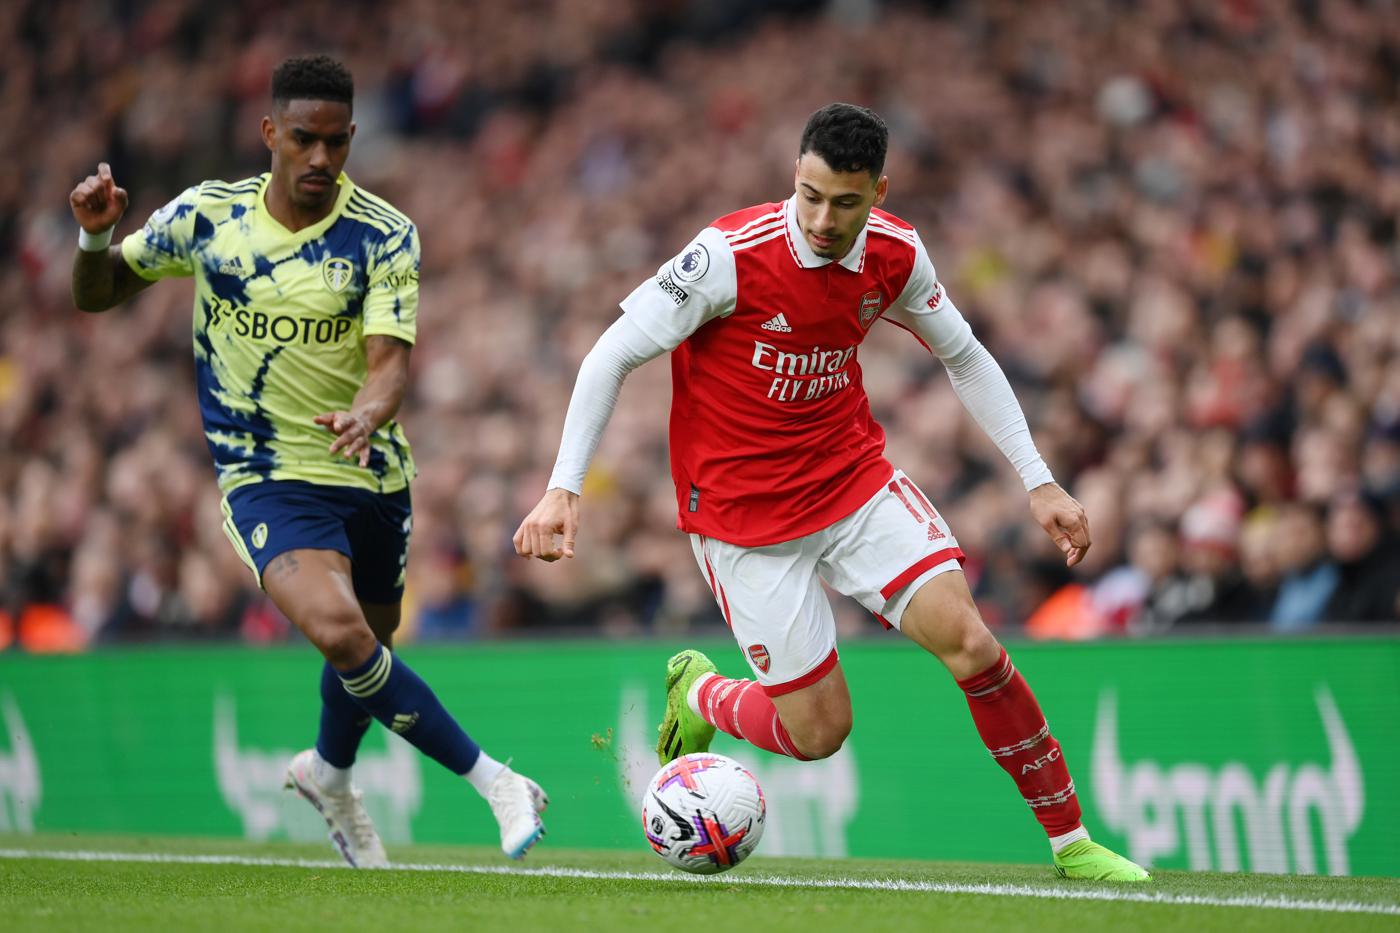 Arsenal - Leeds - 4:1. Championship of England, 29th round. Match review, statistics